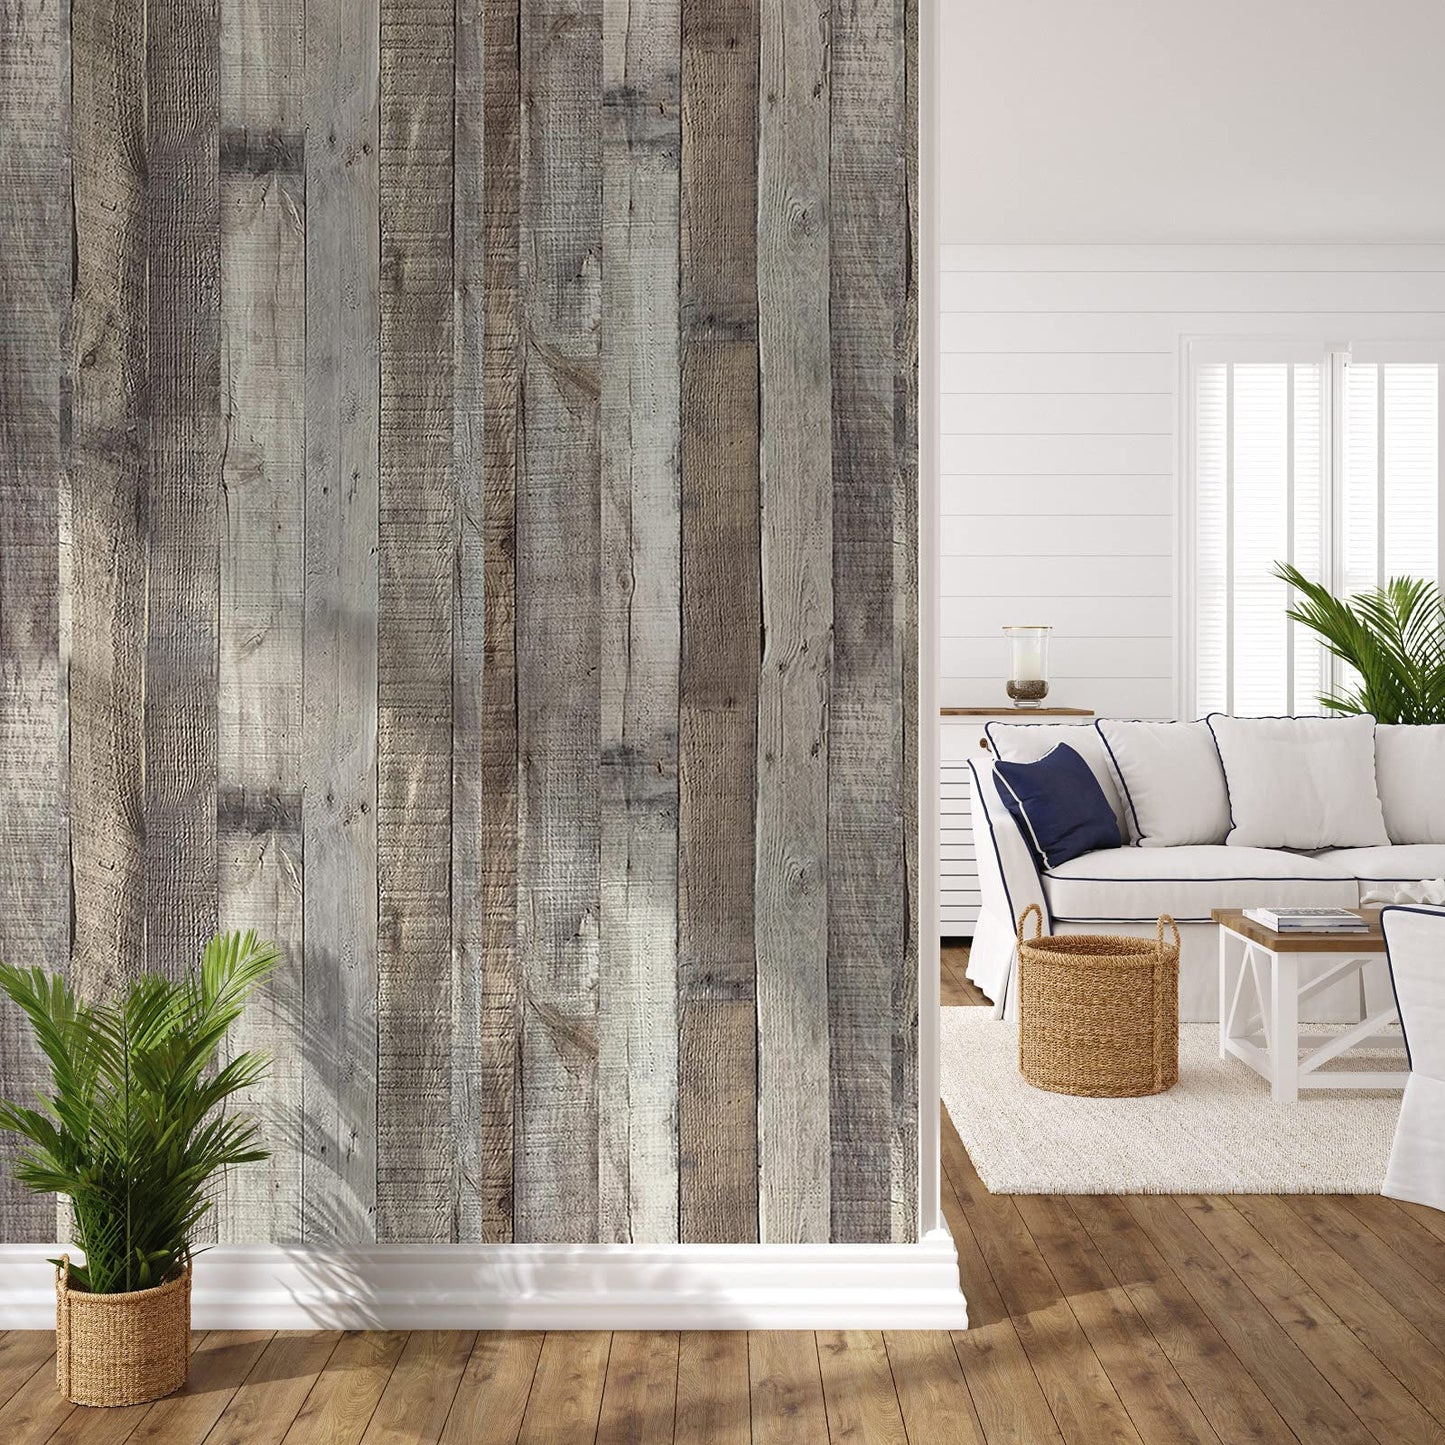 Reqfen Distressed Wood Wallpaper Peel and Stick Wallpaper 17.71” x 118” Self Adhesive Wood Wallpaper Reclaimed Vintage Faux Plank Look Wood Film Shiplap Cabinet Vinyl Removable Decorative Home